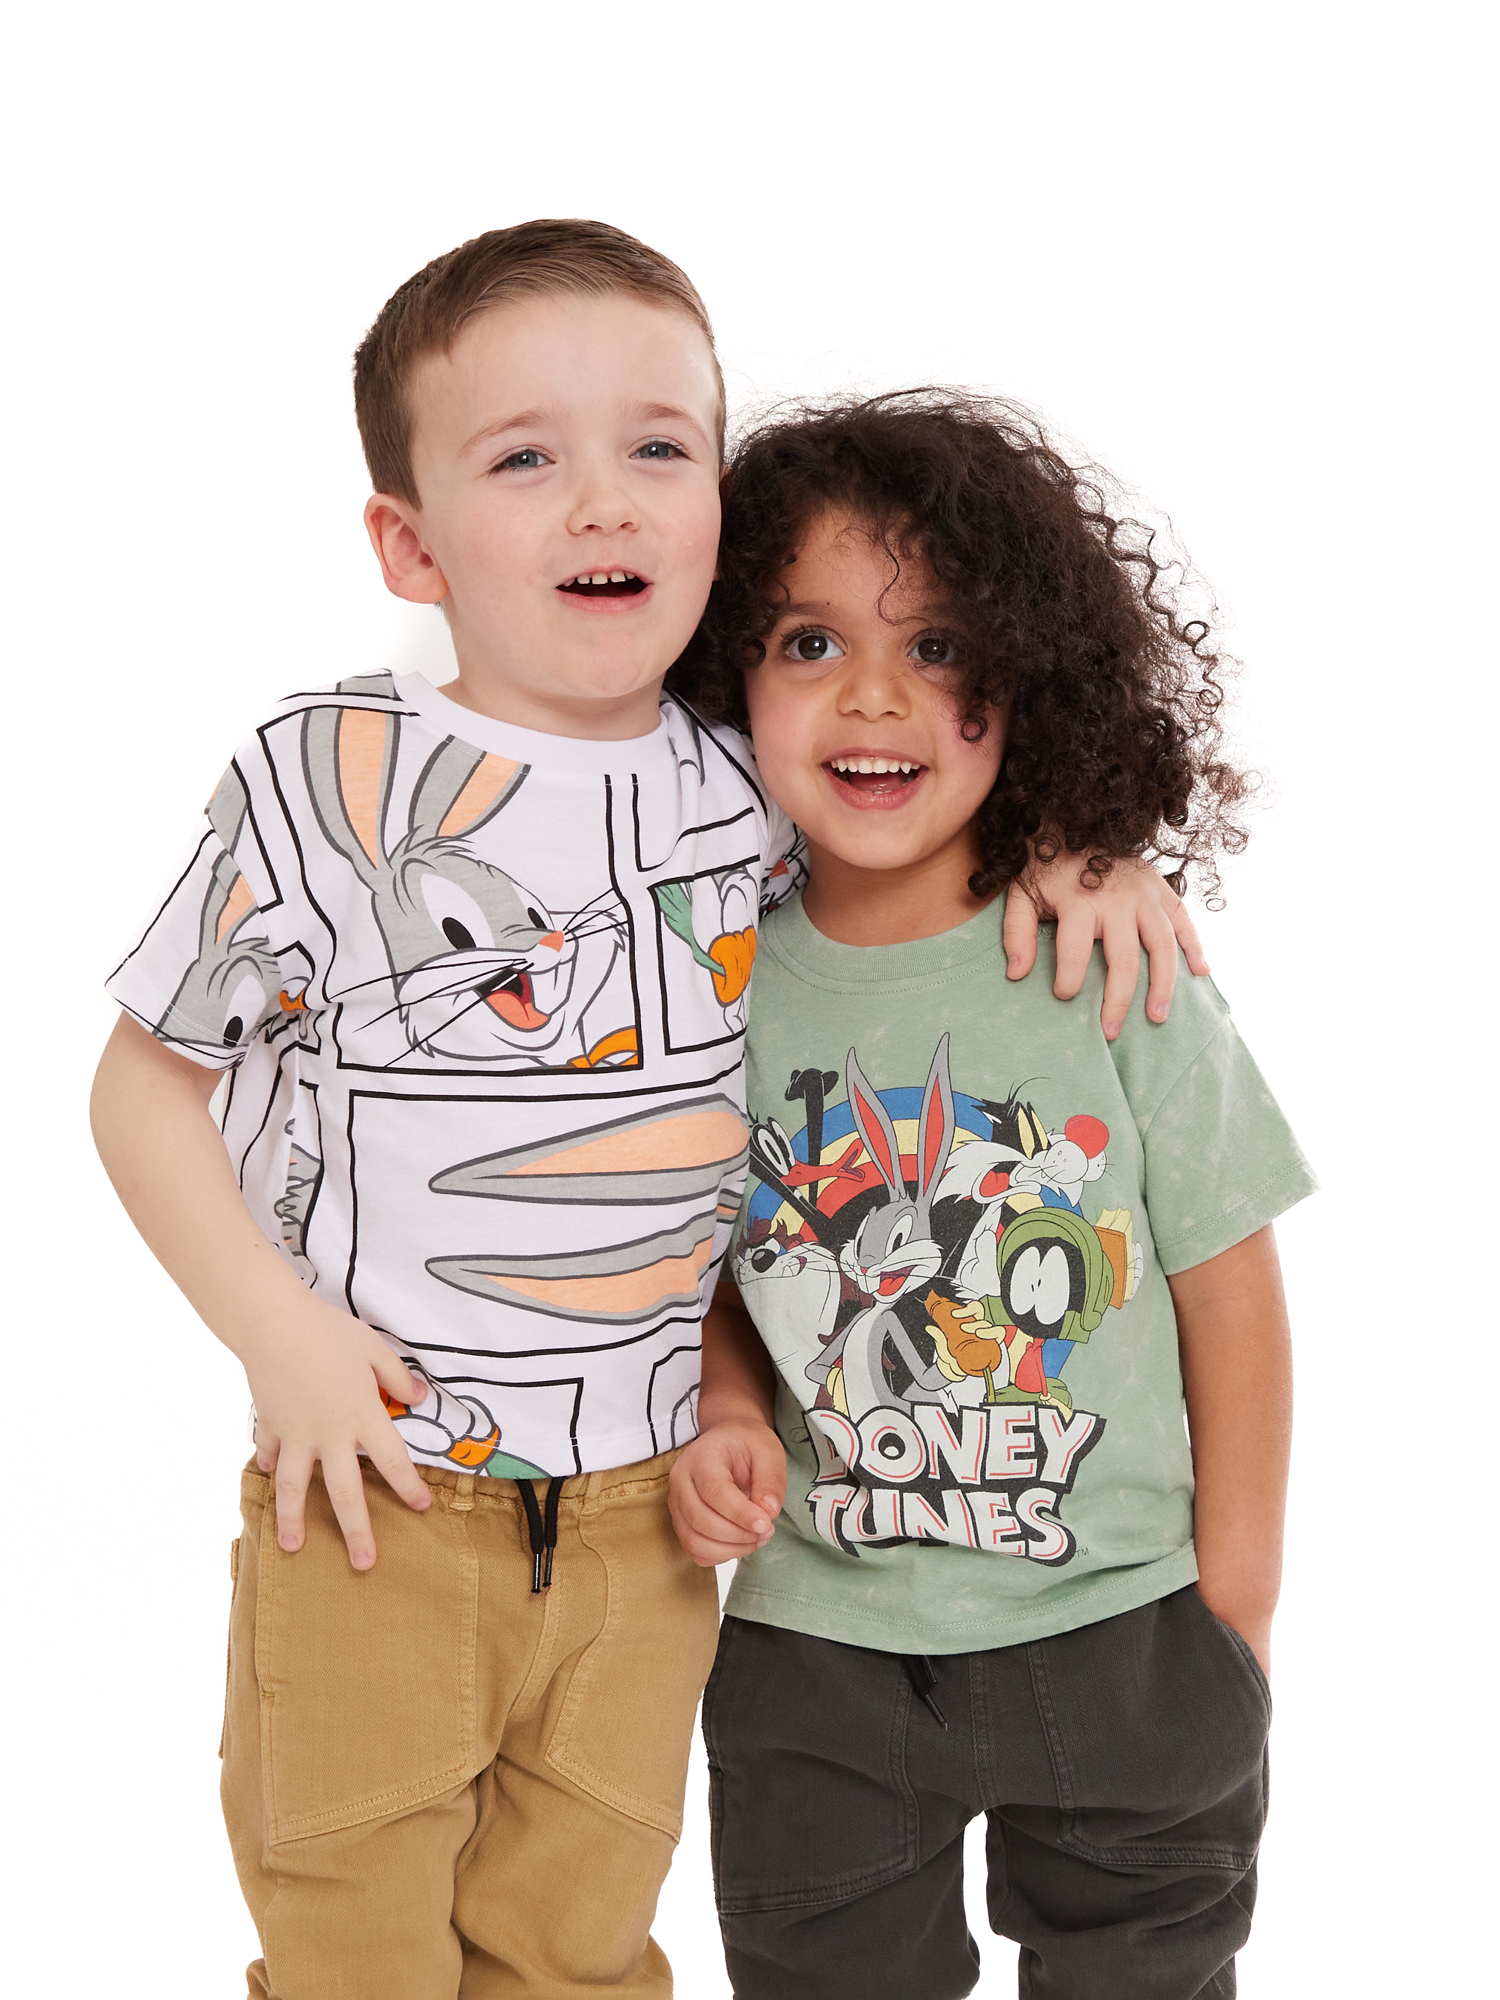 Looney Tunes Toddler Boy Graphic Tees, 2-Pack, Sizes 2T-5T - image 2 of 8